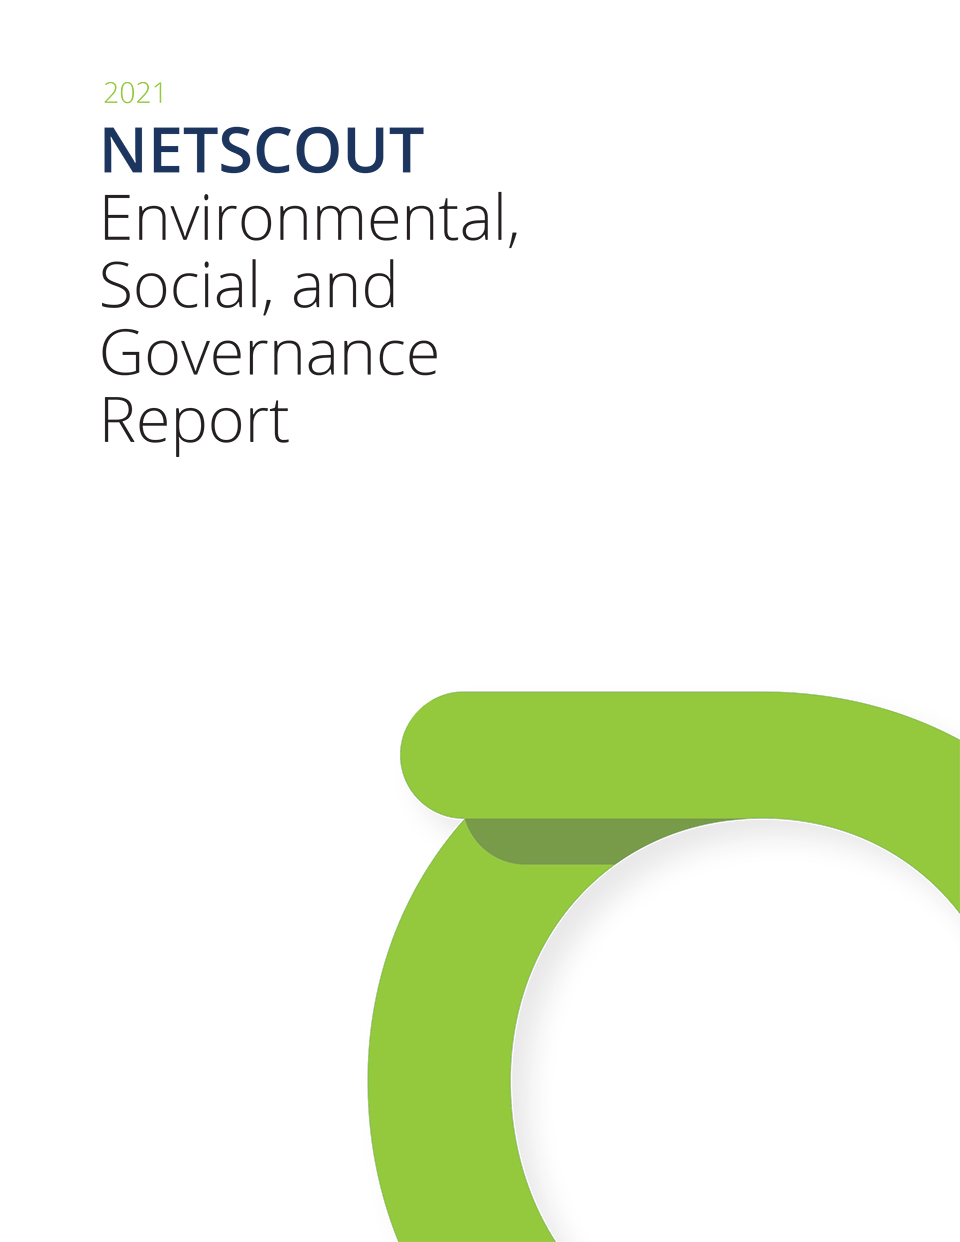 2021 NETSCOUT Environmental, Social, and Governance Report